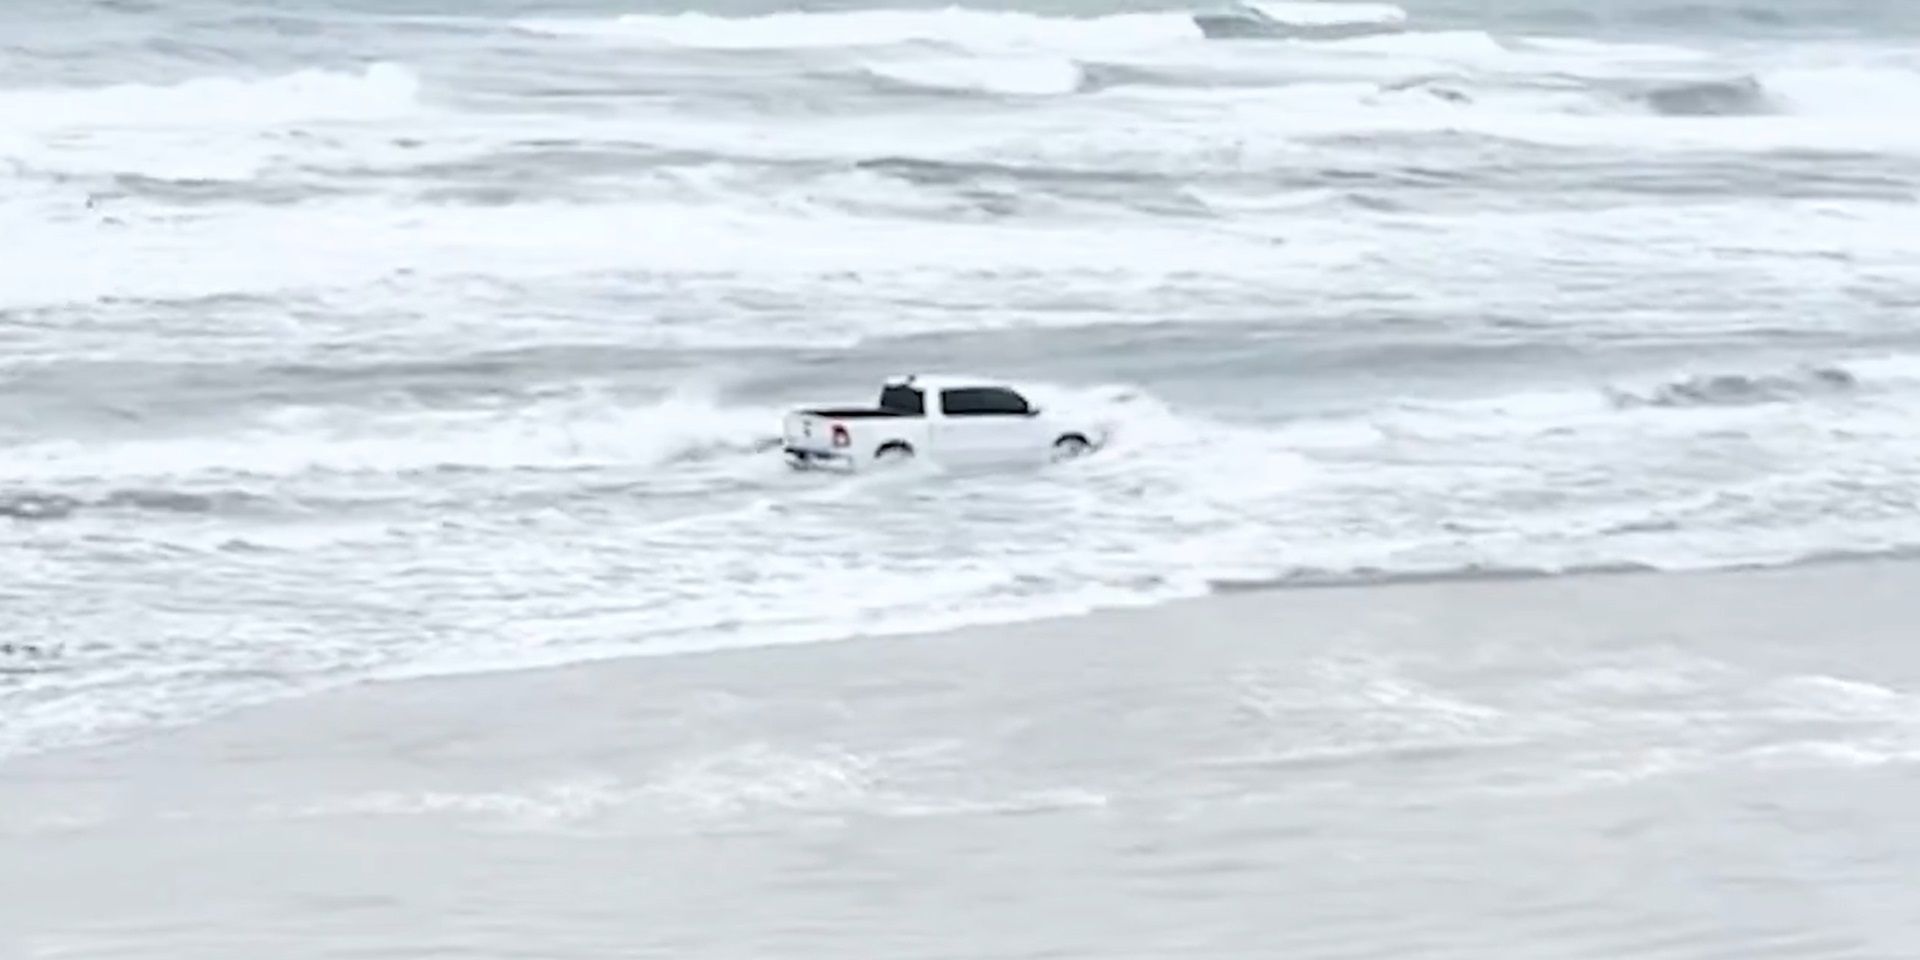 Florida Man Arrested for Attempting to 'Surf' His Truck